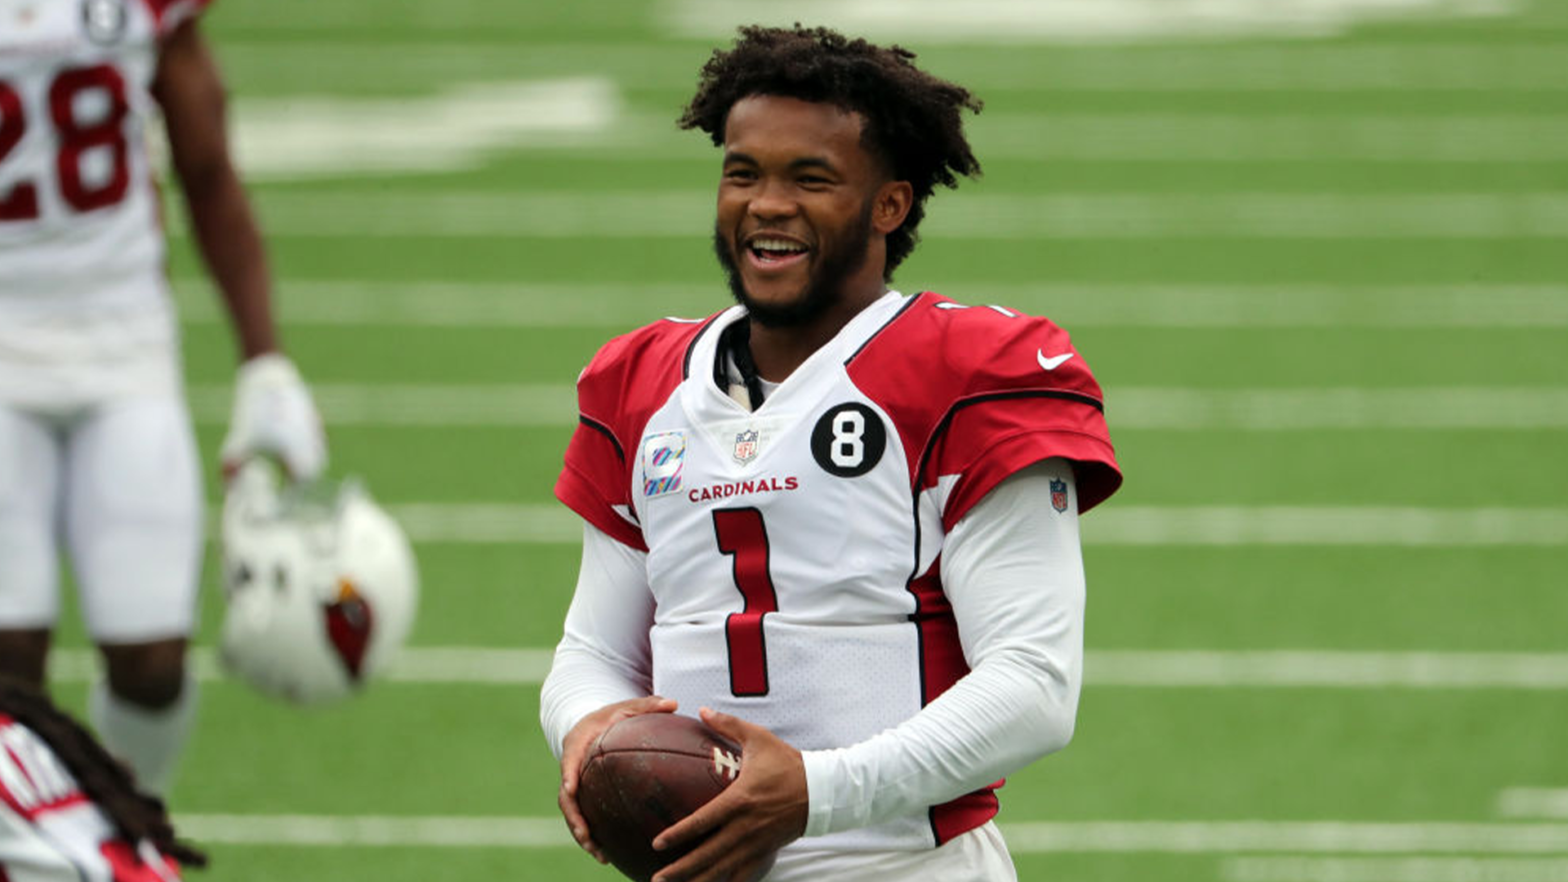 Before Kyler Murray's $230.5M NFL Deal, There Was A $4.66M Contract With The MLB